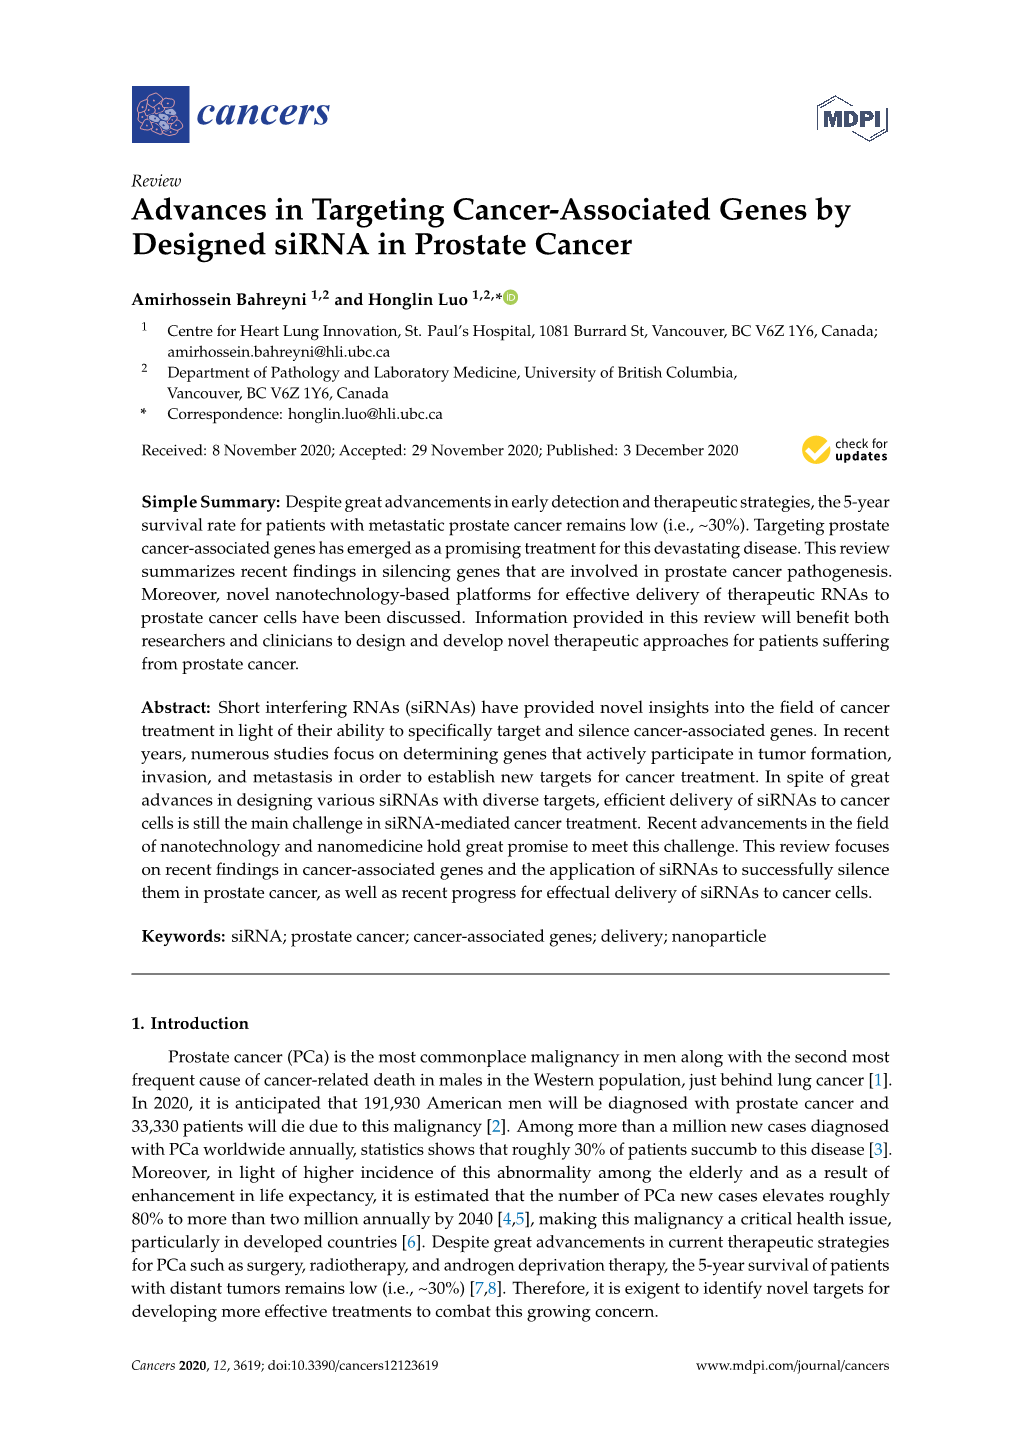 Advances in Targeting Cancer-Associated Genes by Designed Sirna in Prostate Cancer